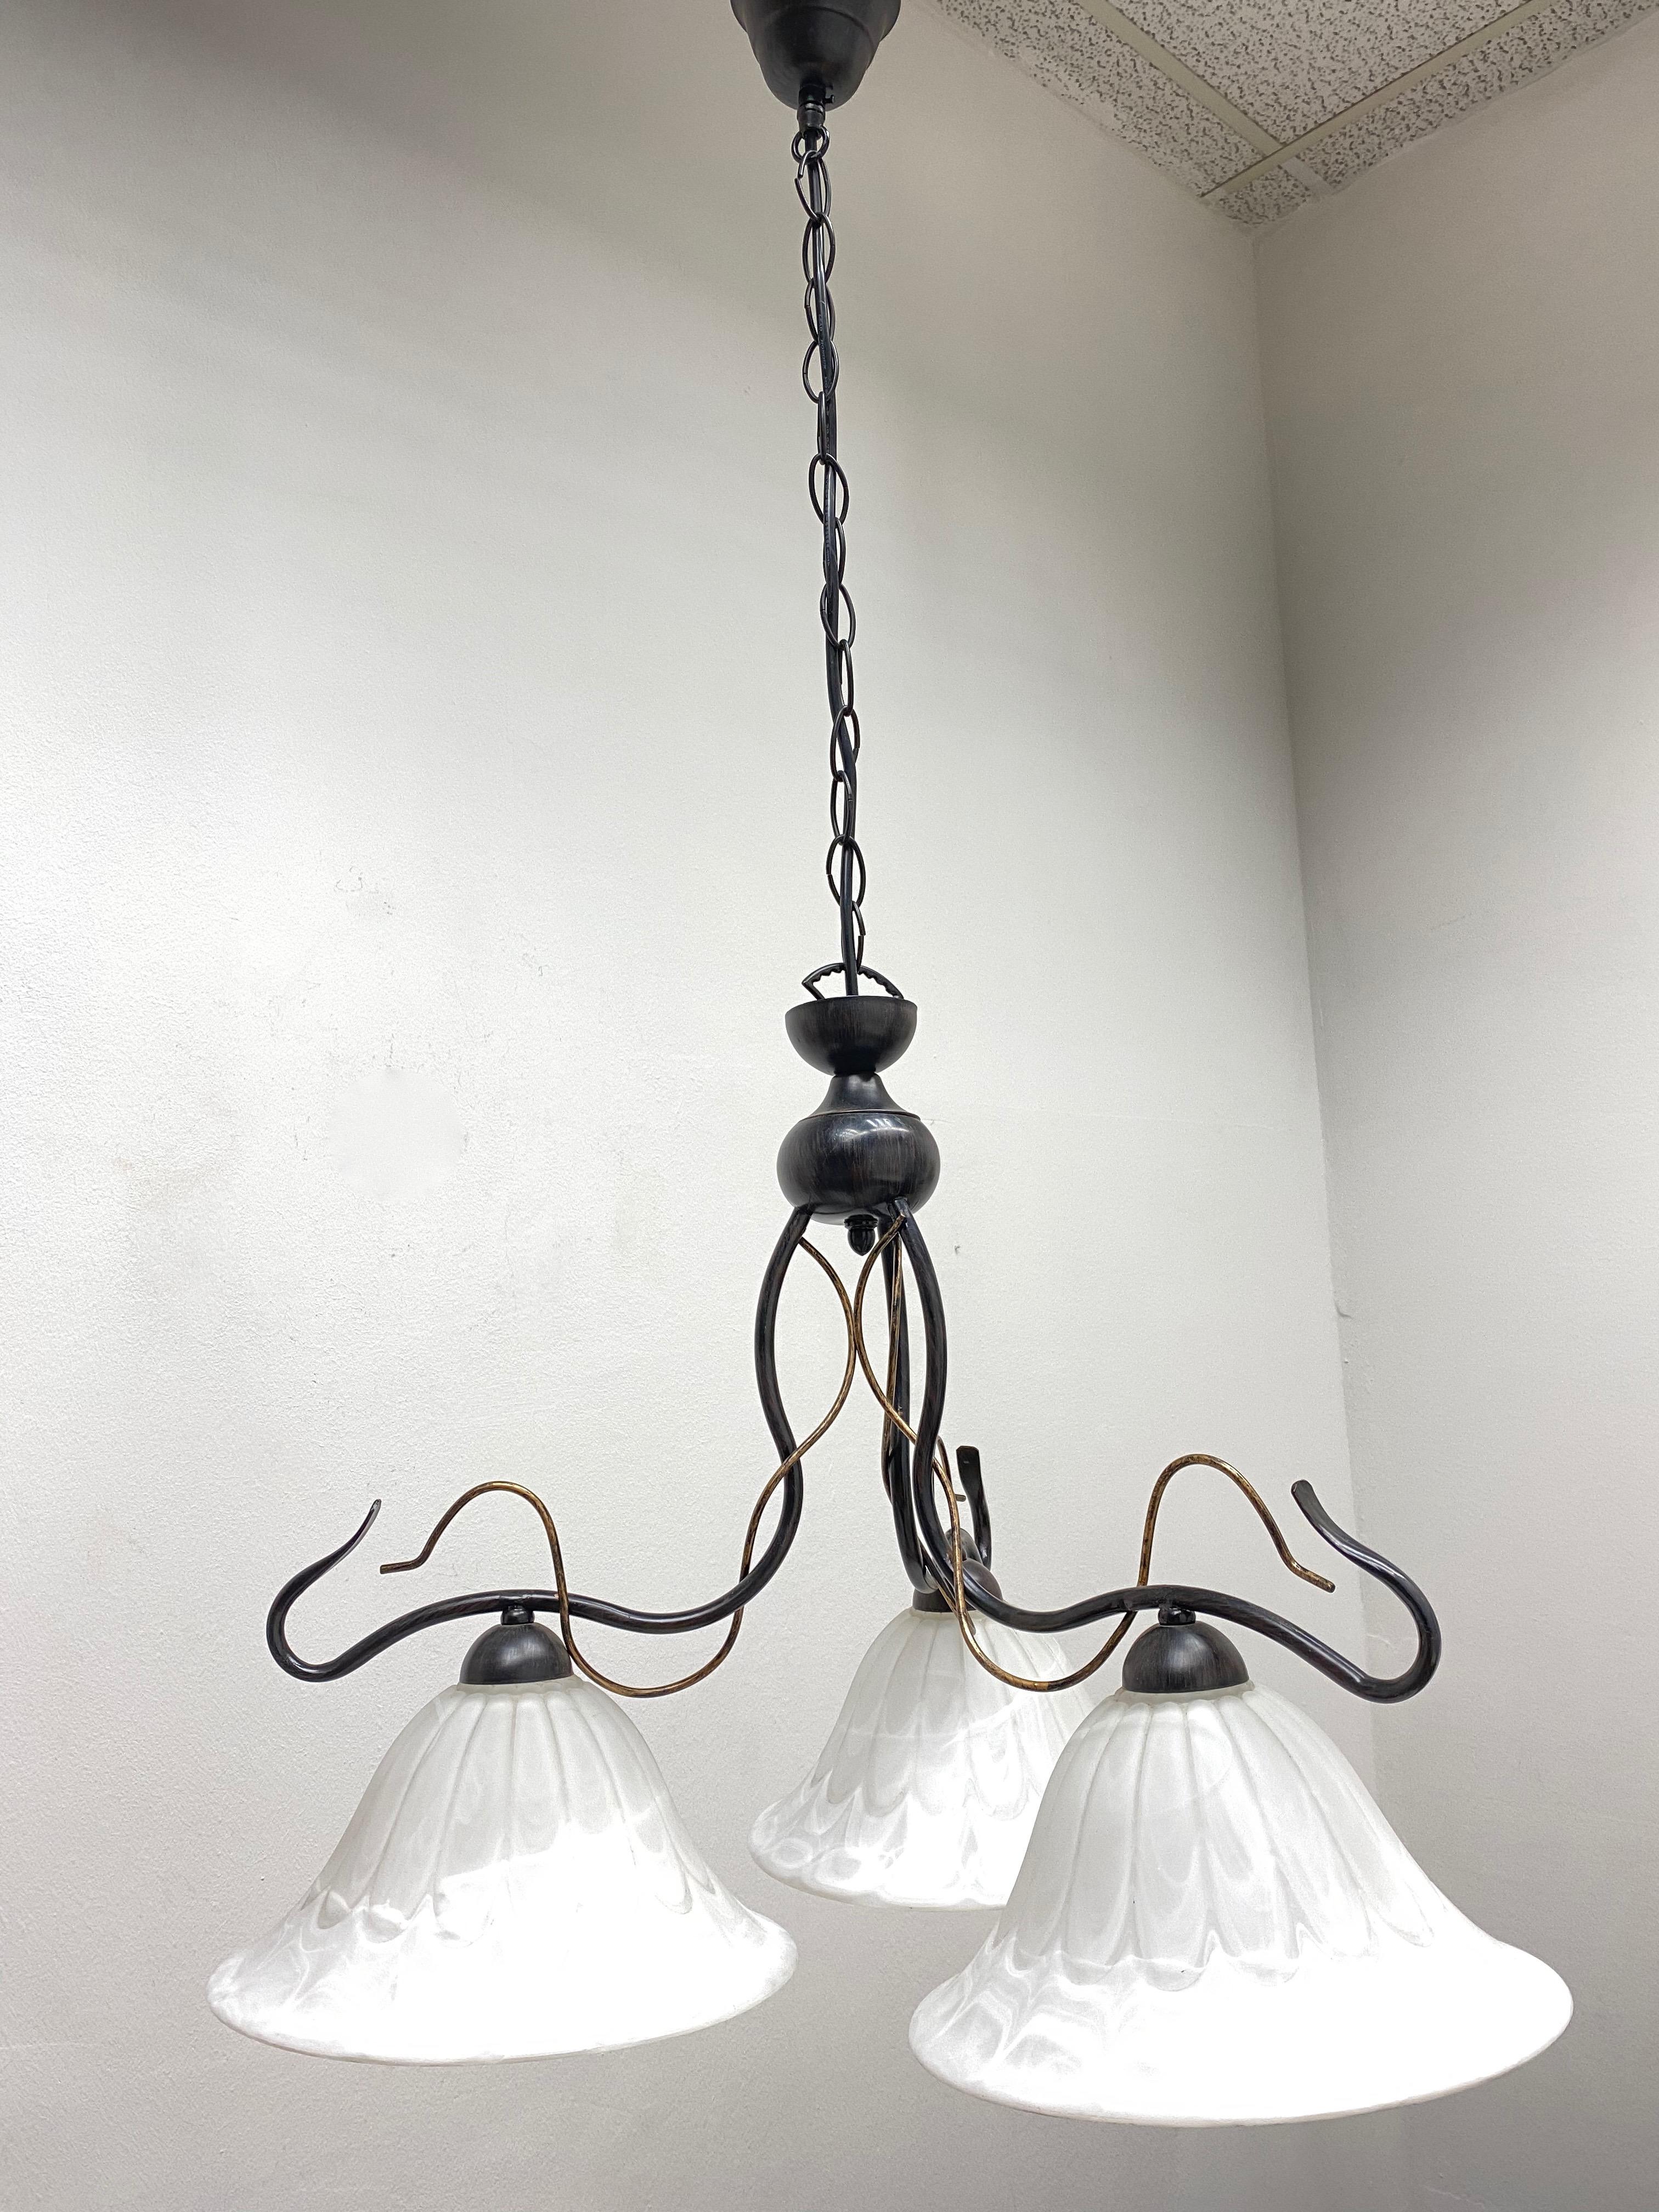 A beautiful chandelier made in Germany in the 1980s. It is made of metal and glass.
The chandelier requires 3 European E27 / 110 volt Edison bulbs, each bulb up to 60 watts.
A nice addition to every room, but think this will be a gorgeous